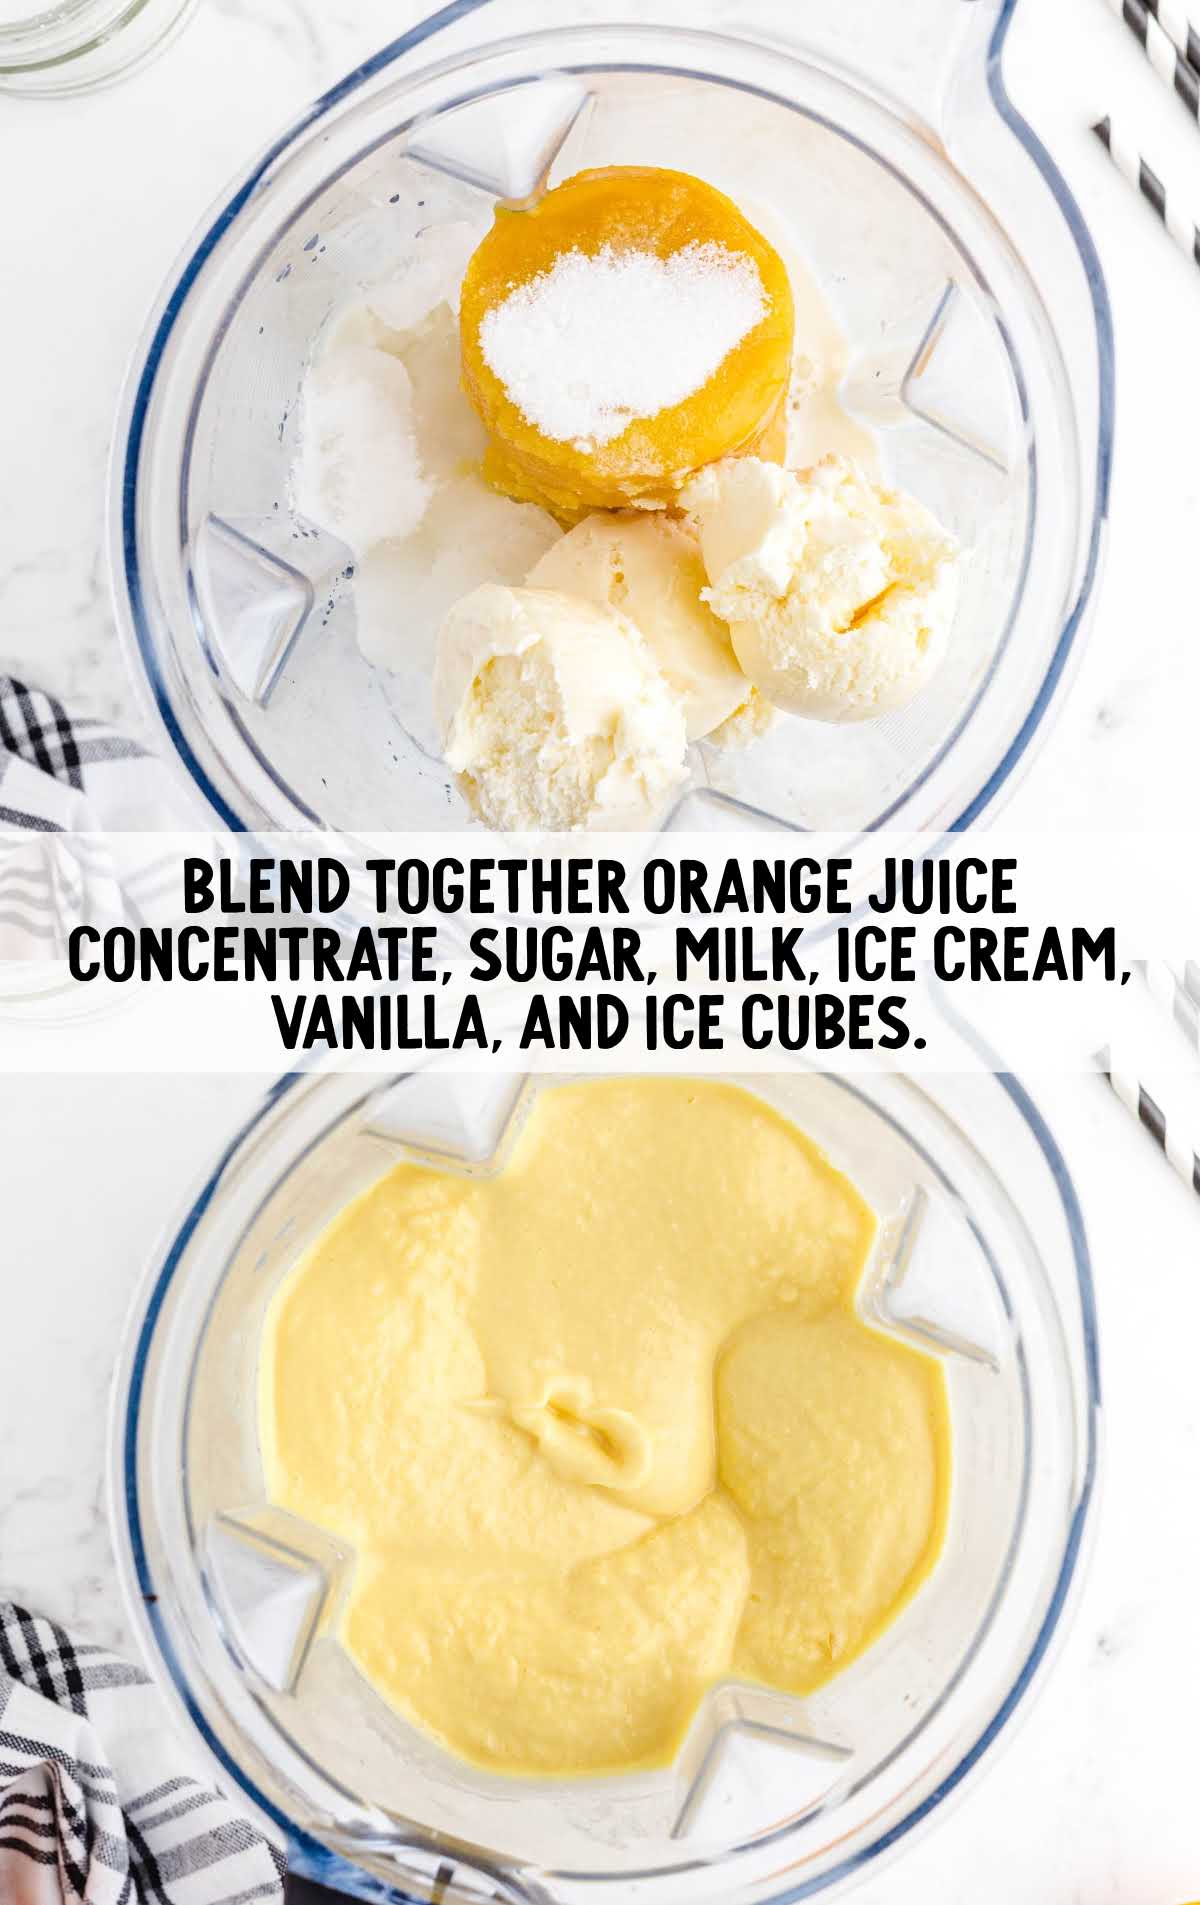 orange juice concentrate, sugar, milk, ice cream, vanilla extract, and ice cubes added to a blender